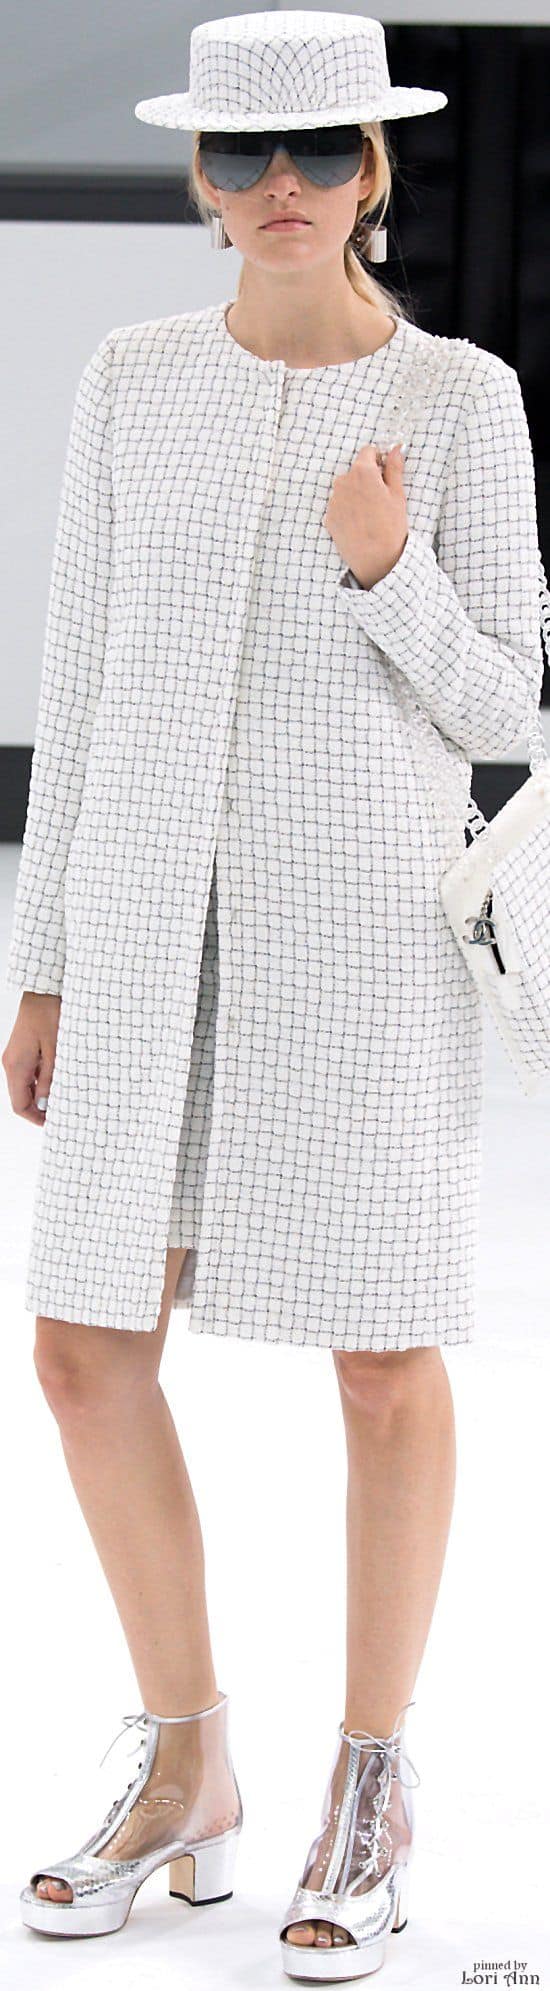 gingham coat and panama hat in Chanel style